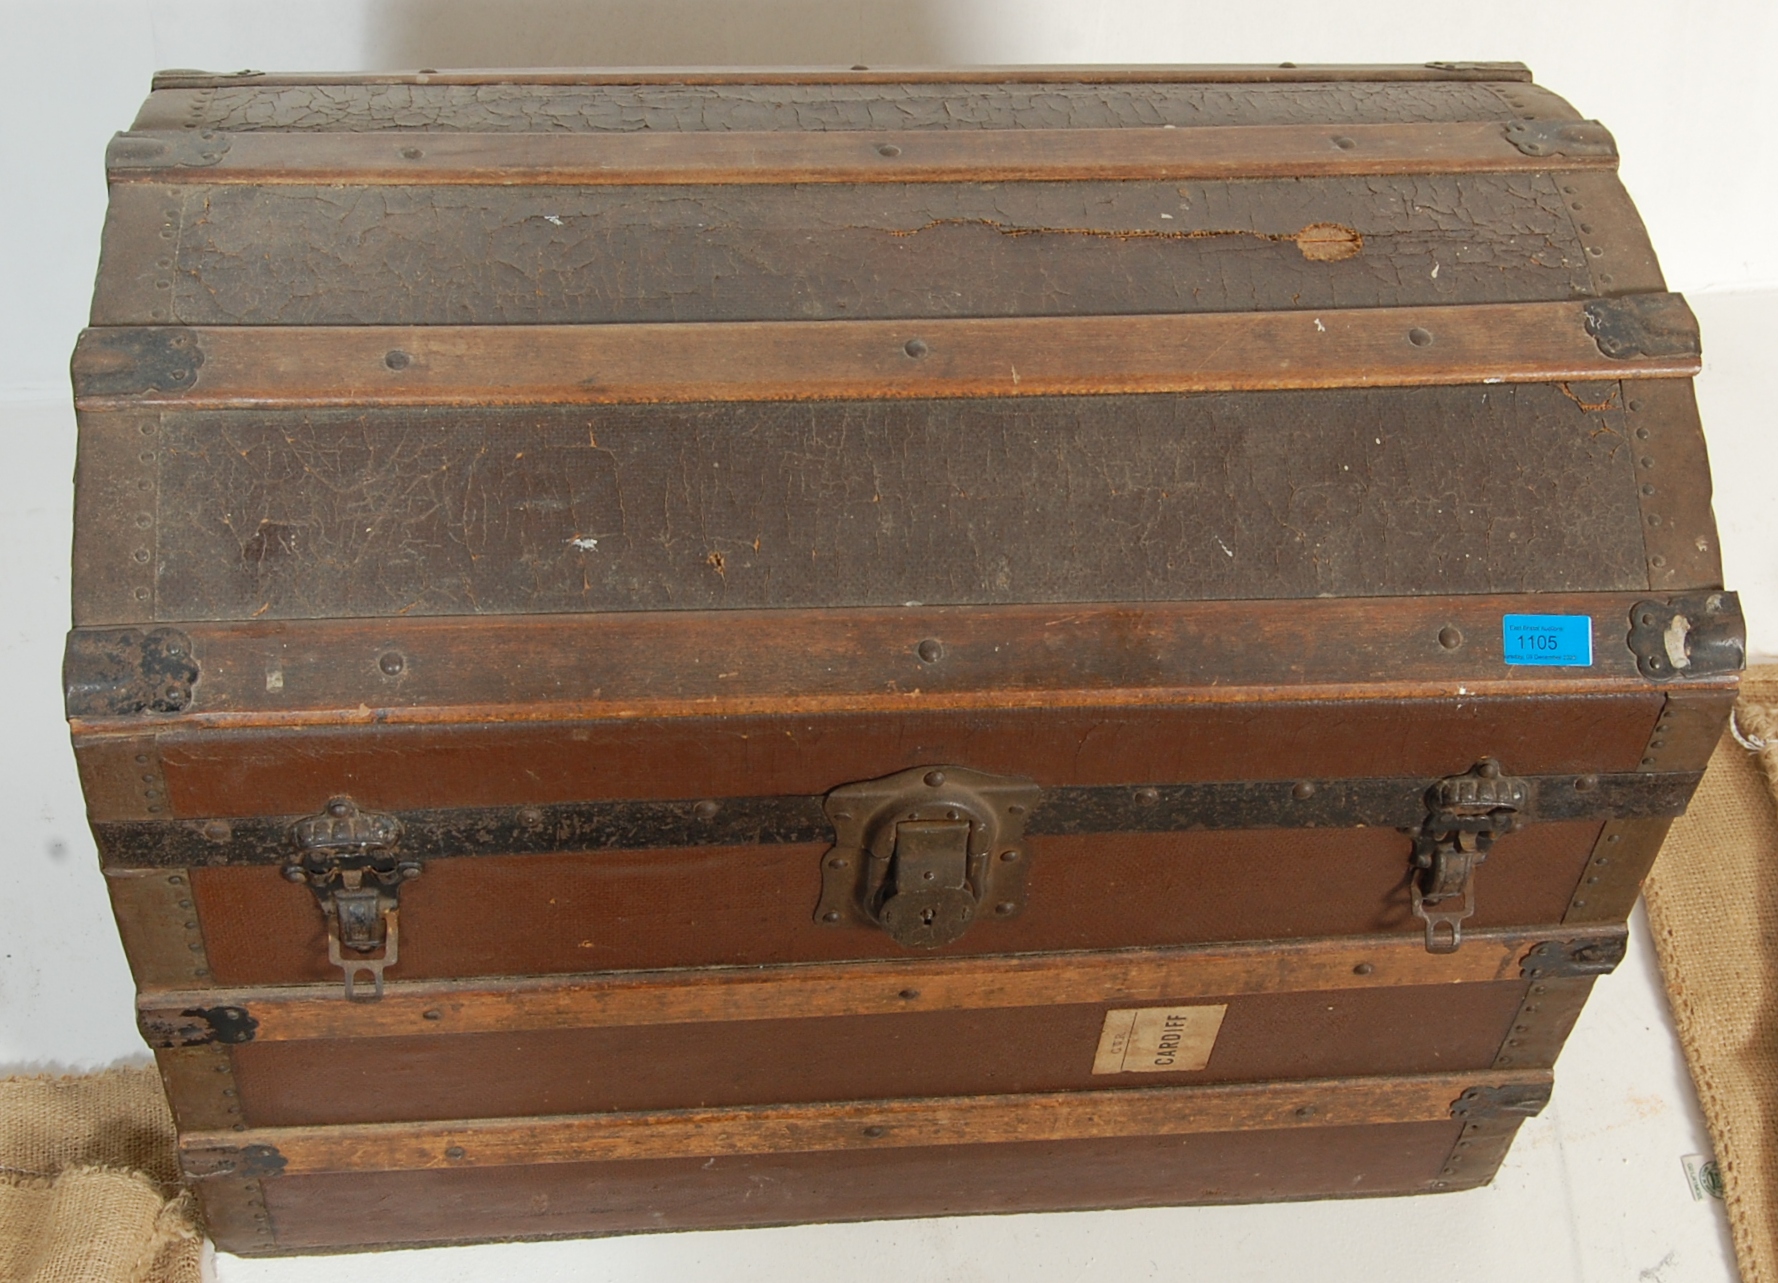 AN EARLY 20TH CENTURY DOME TOP CANVAS TRUNK / SHIPPING TRUNKS TOGETHER WITH FABRIC COFFEE SACKS - Image 3 of 7